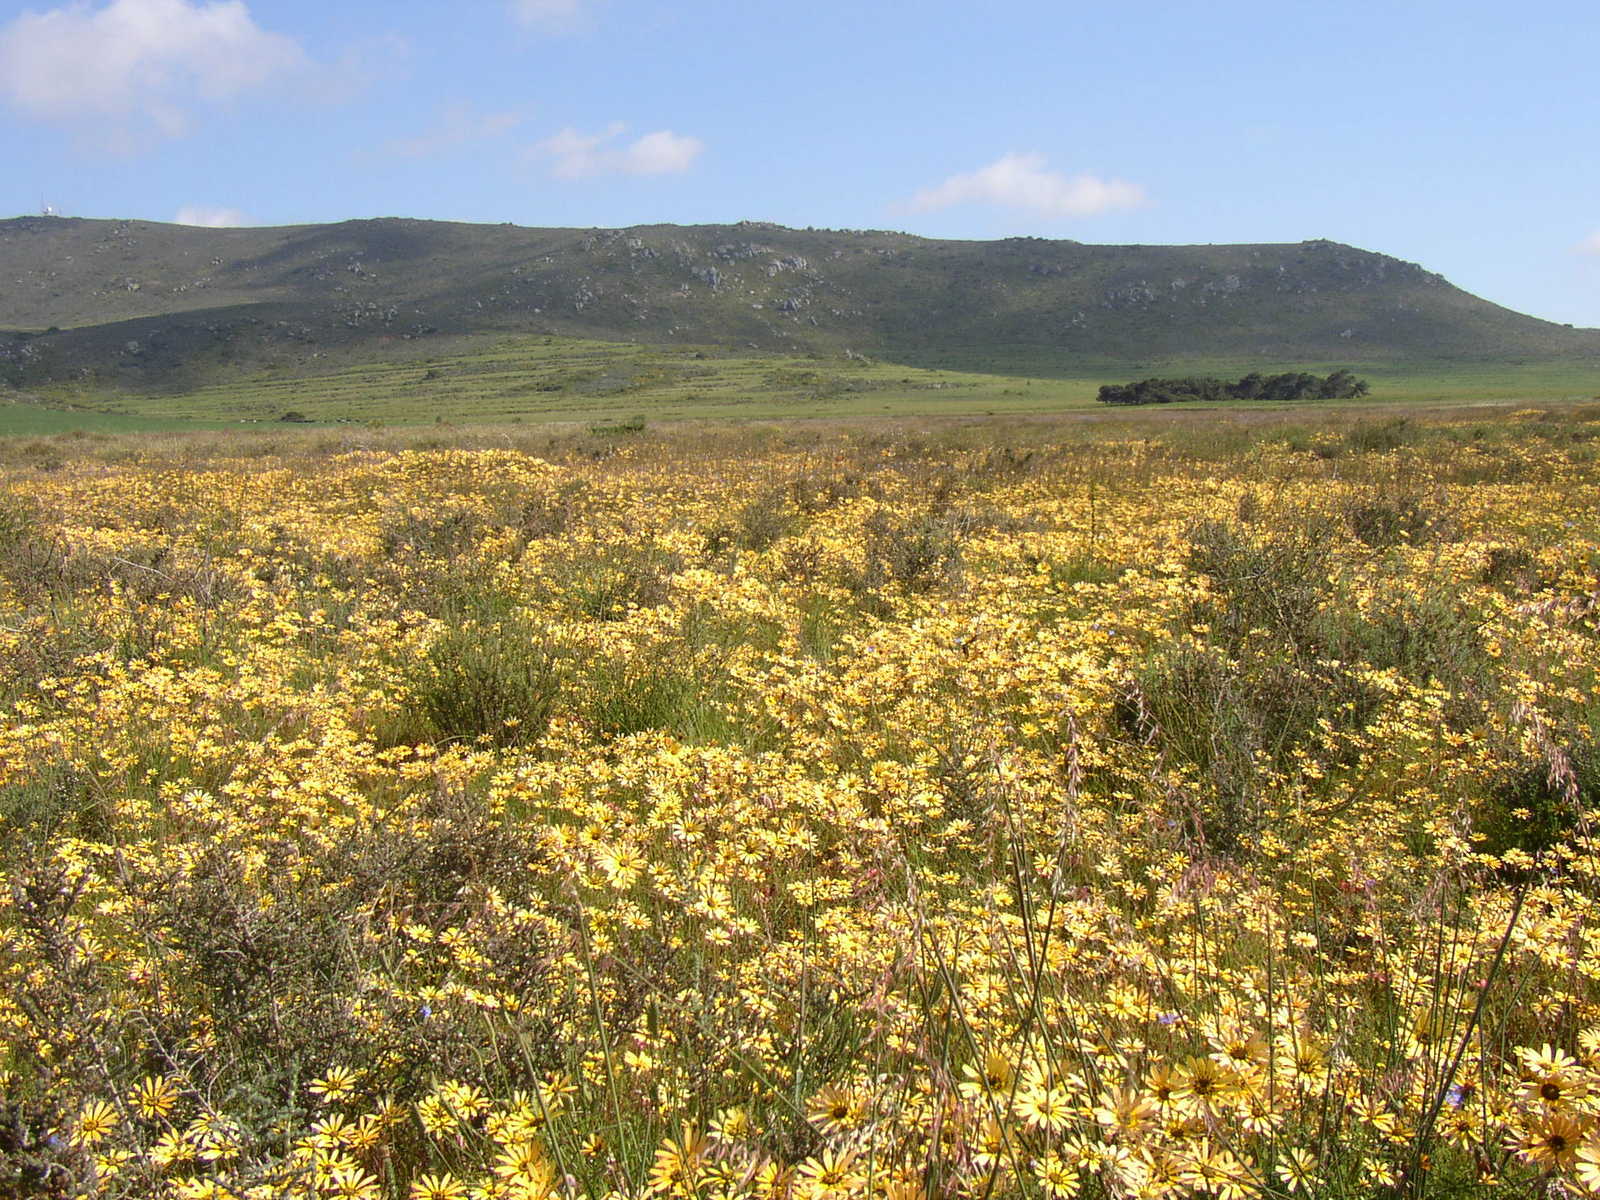 the view of a hillside with wildflowers in bloom